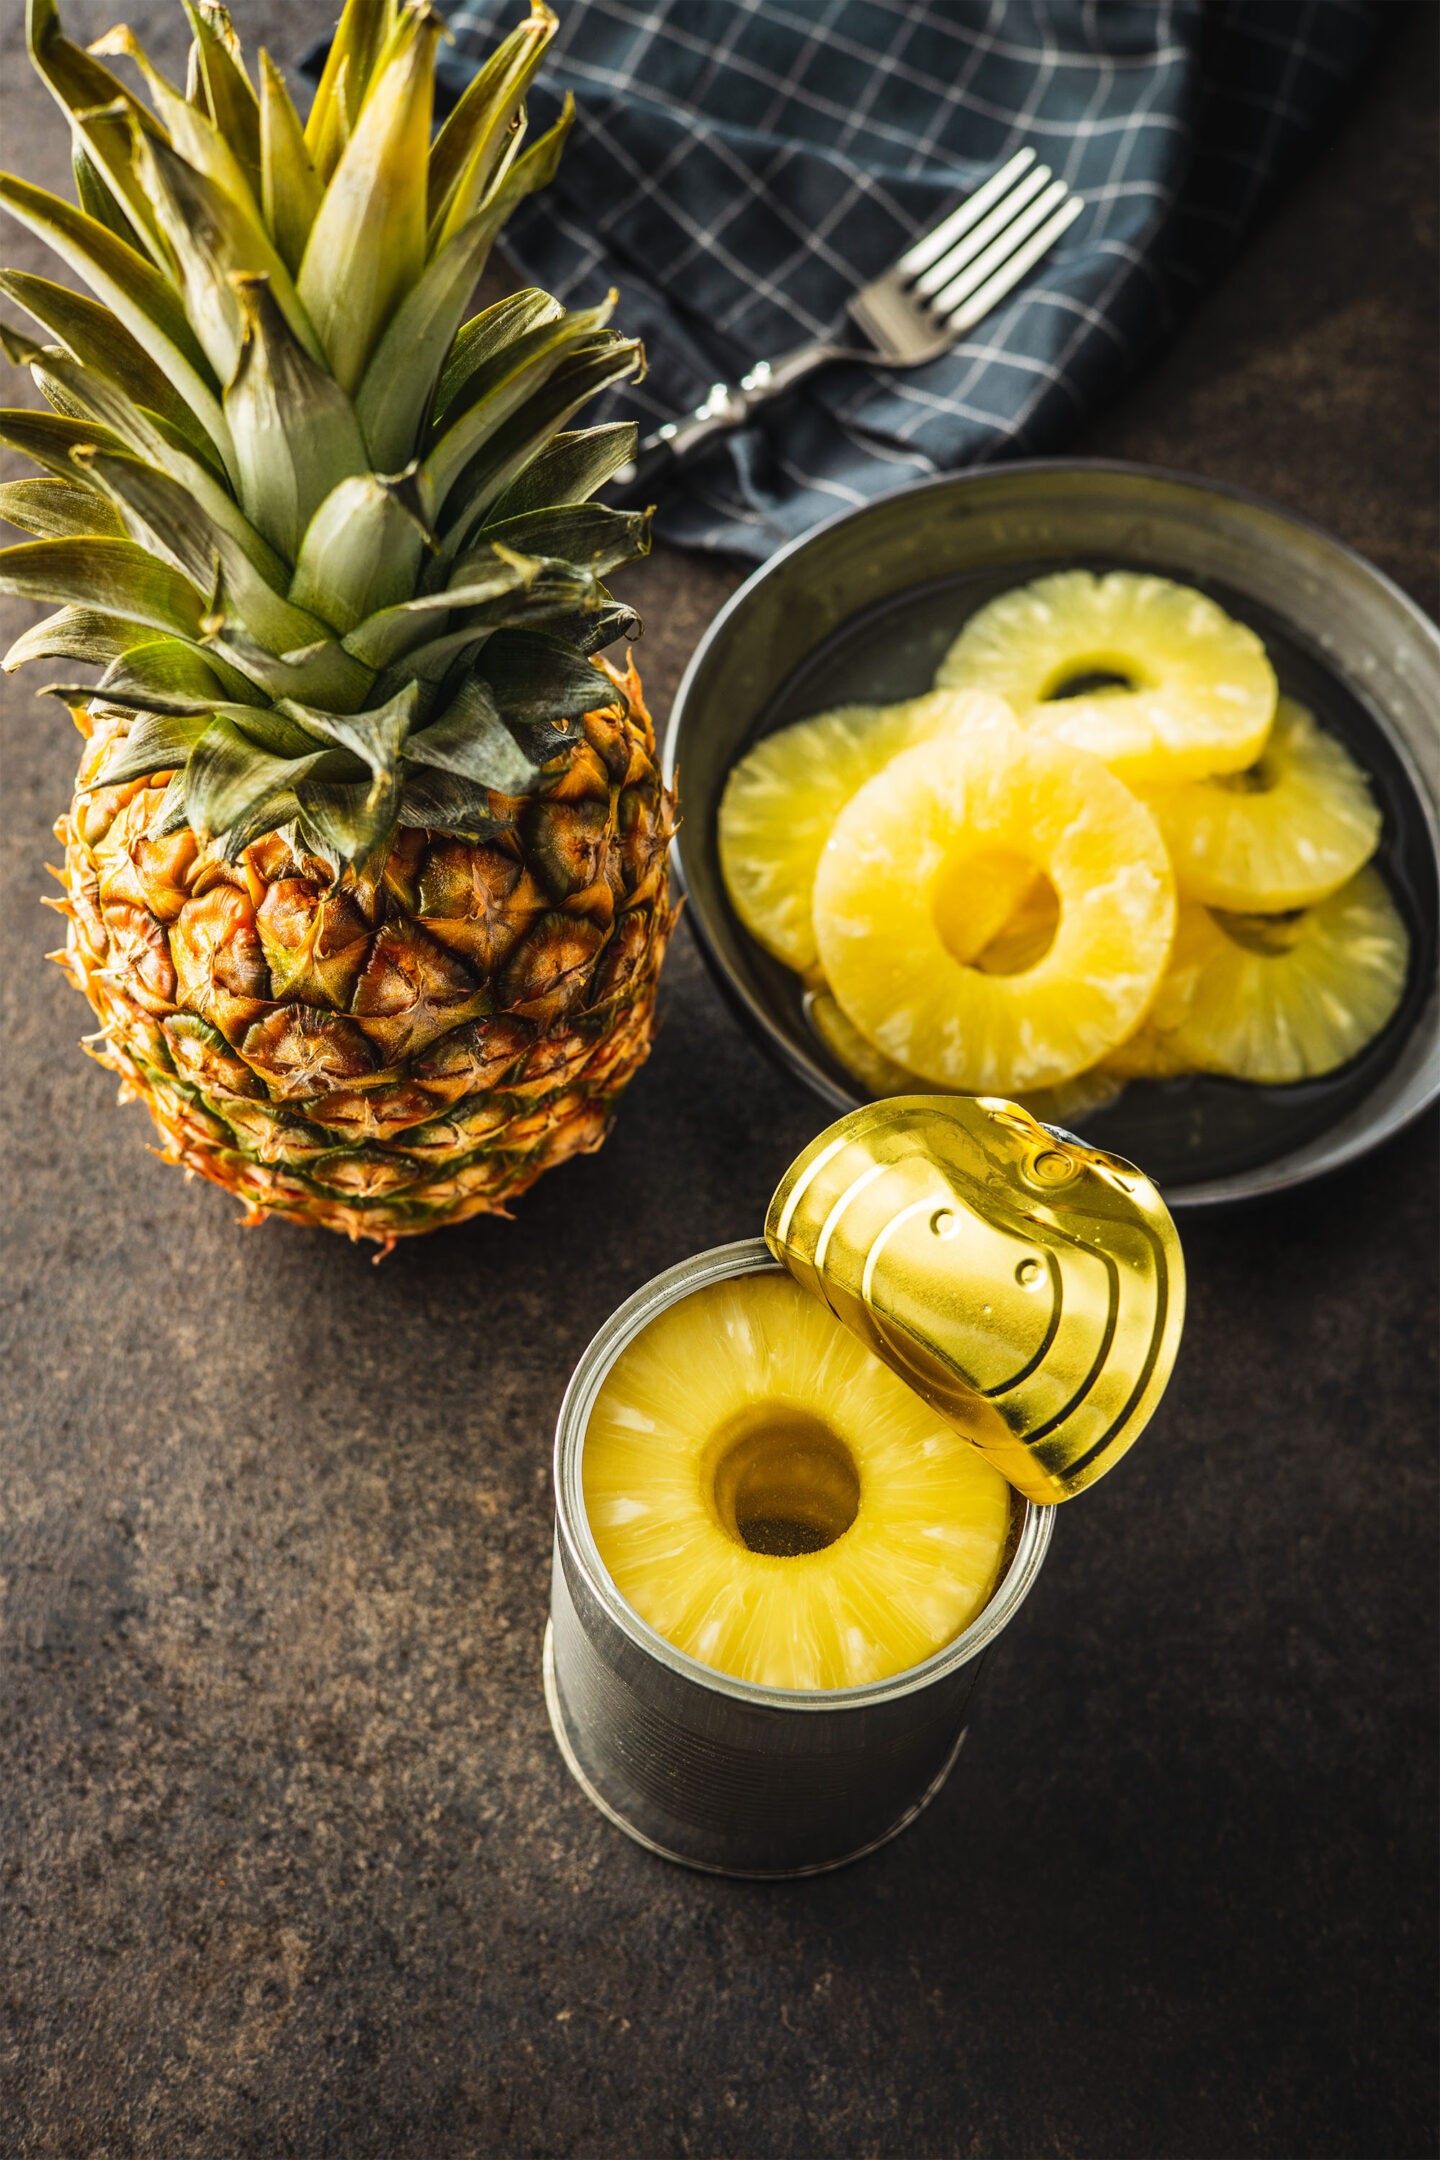 canned sliced pineapple fruit in can